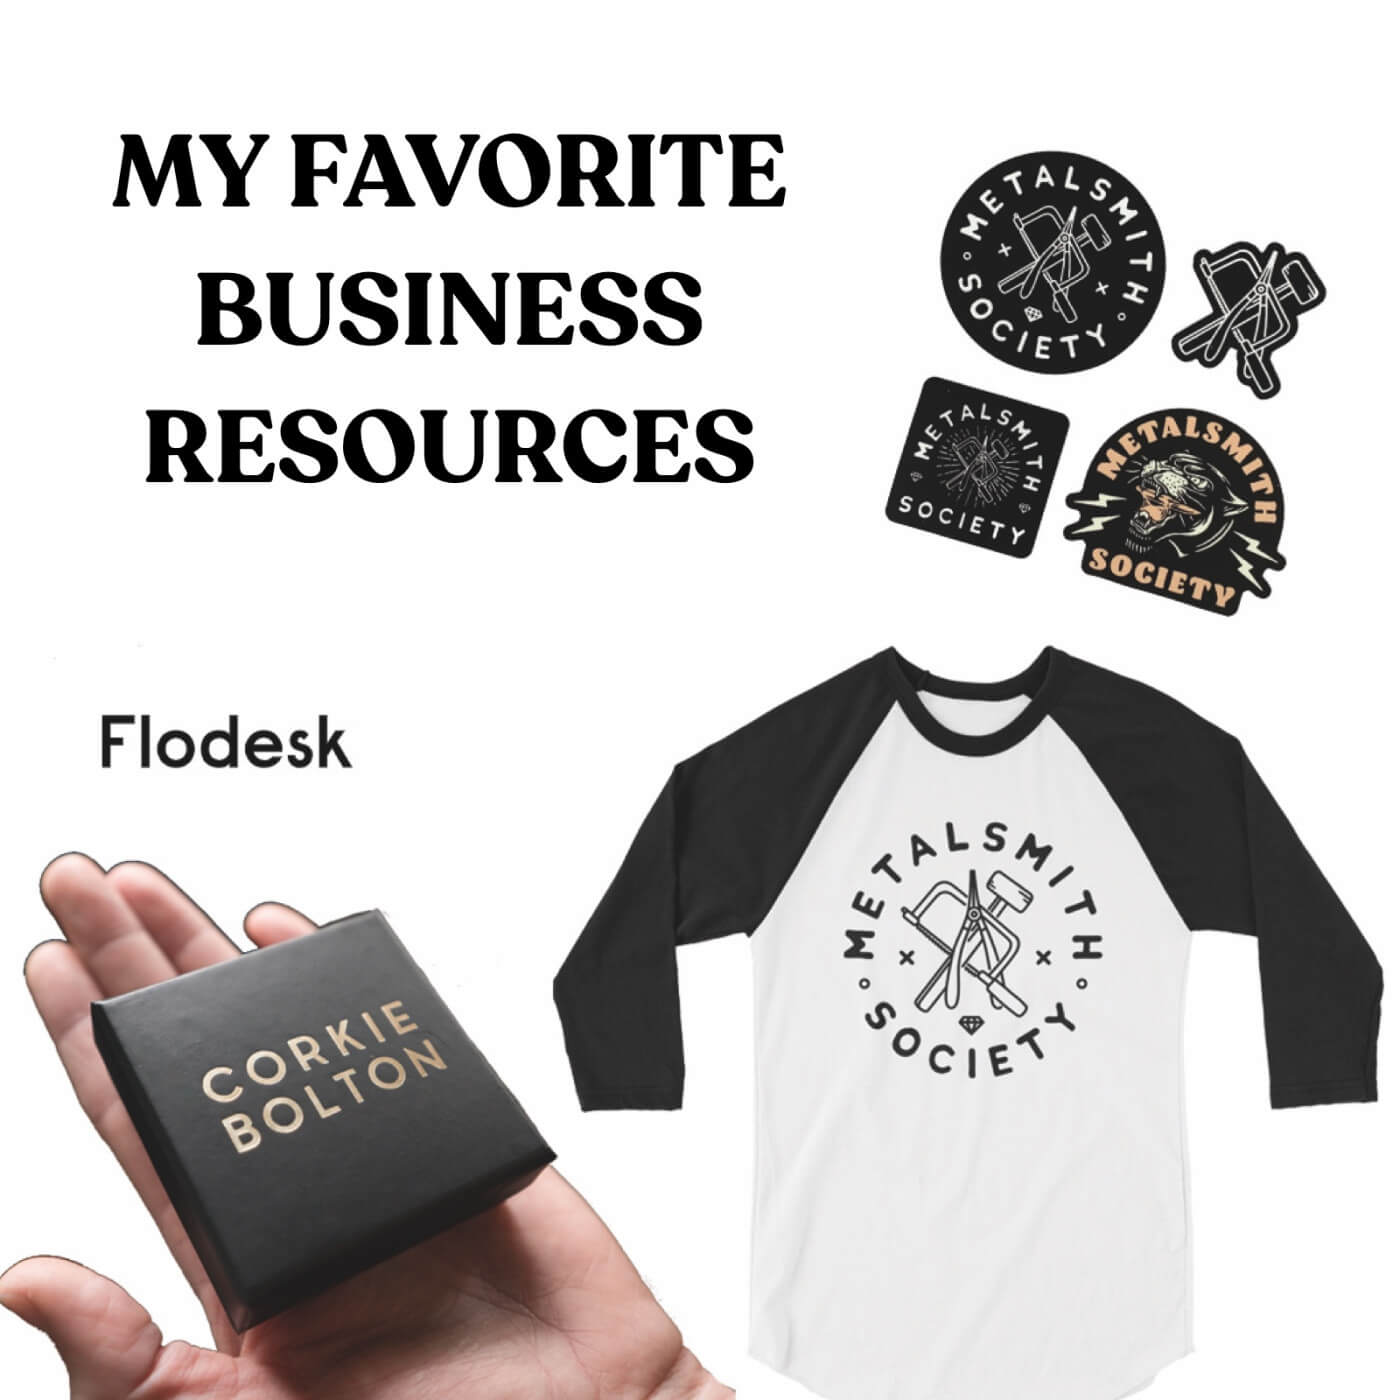 My Favorite business resources blog.